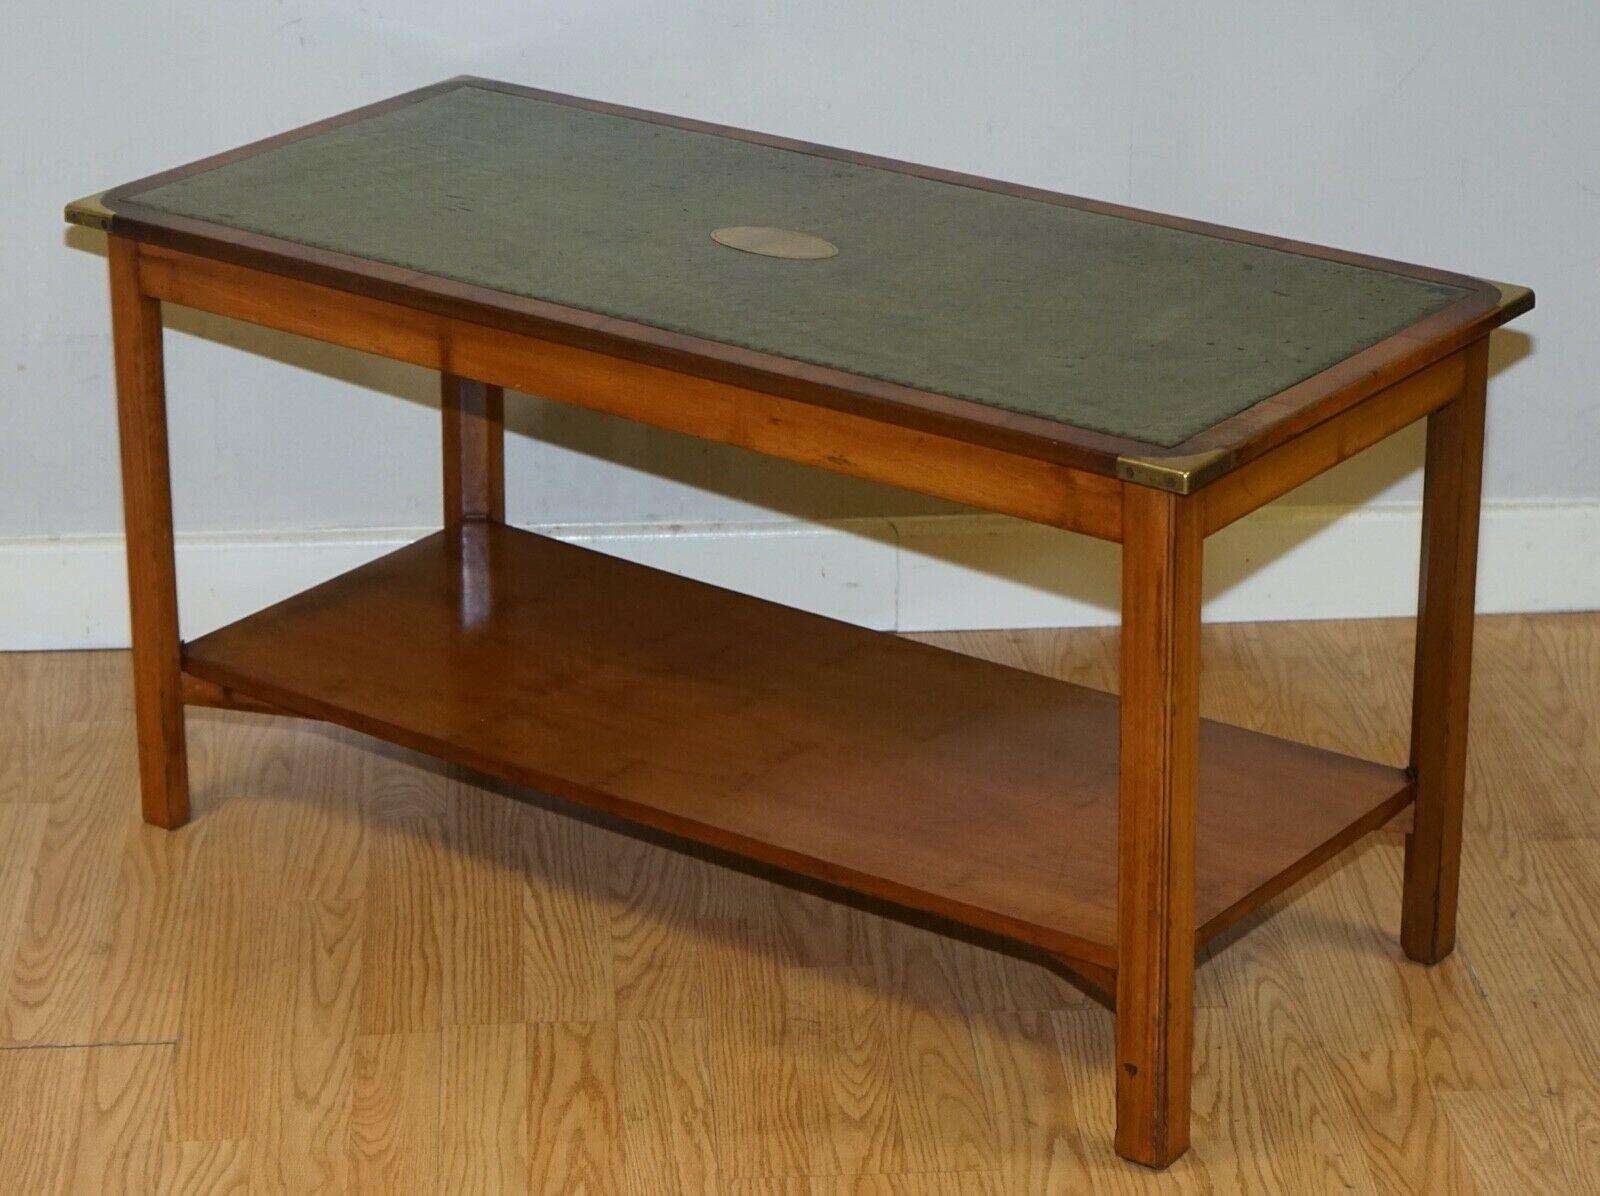 British Bevan Funnell Military Campaign Yew Wood Green Leather Top Coffee Table